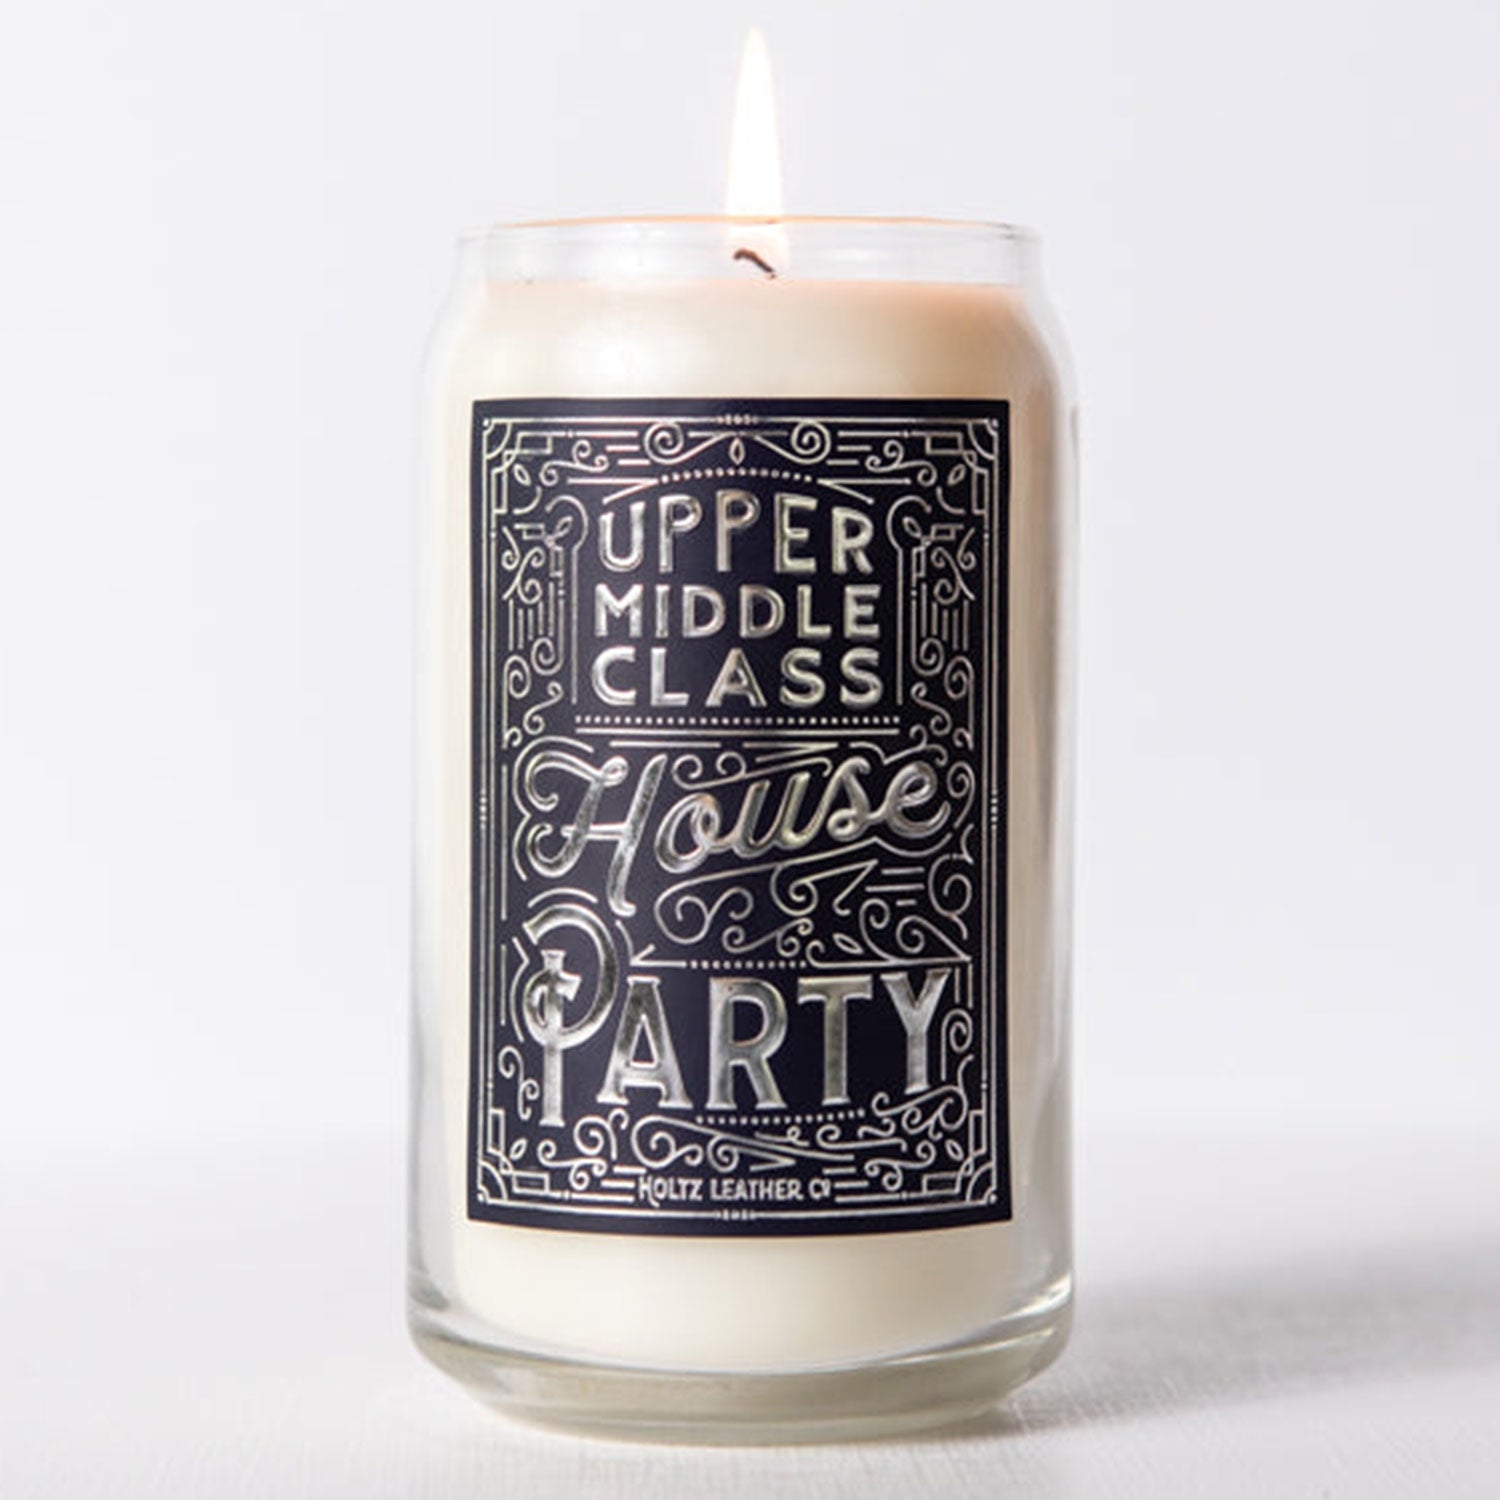 Upper-Middle Class House Party 13 oz candle